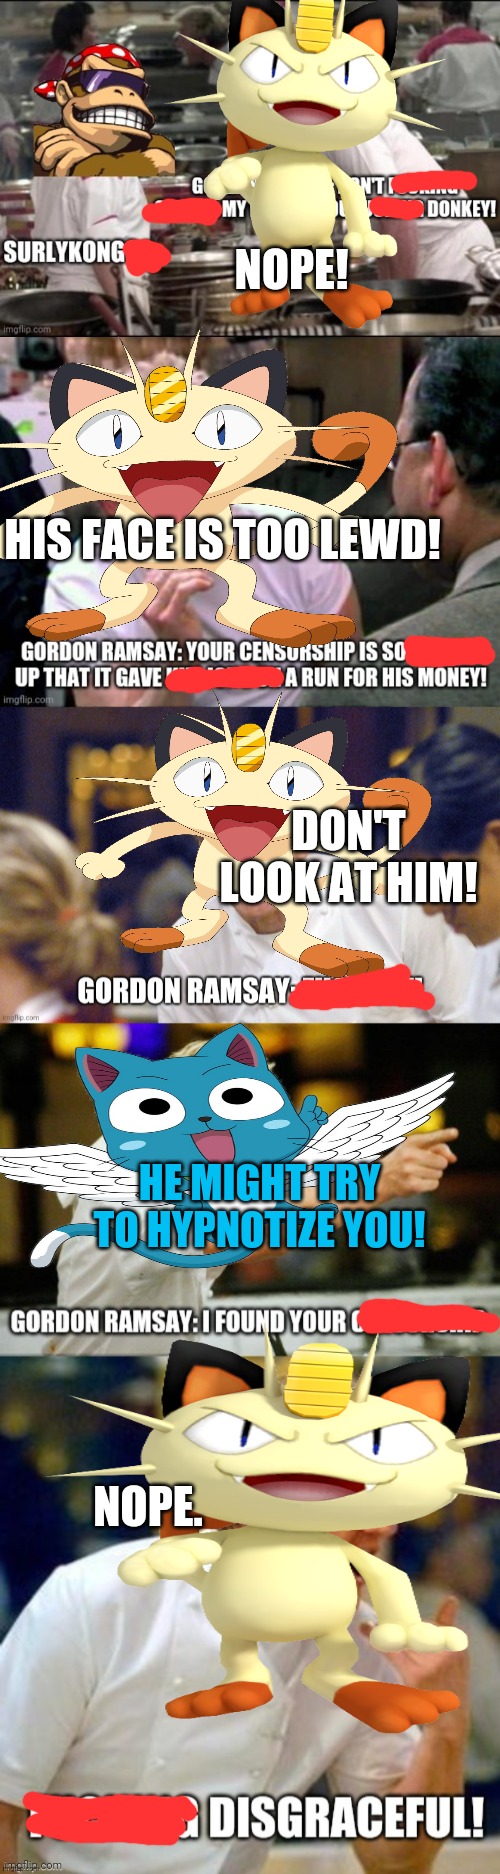 Meowth censors Gordon Ramsay | NOPE! HIS FACE IS TOO LEWD! DON'T LOOK AT HIM! HE MIGHT TRY TO HYPNOTIZE YOU! NOPE. | image tagged in meowth,censorship,chef gordon ramsay,lewd,but why why would you do that | made w/ Imgflip meme maker